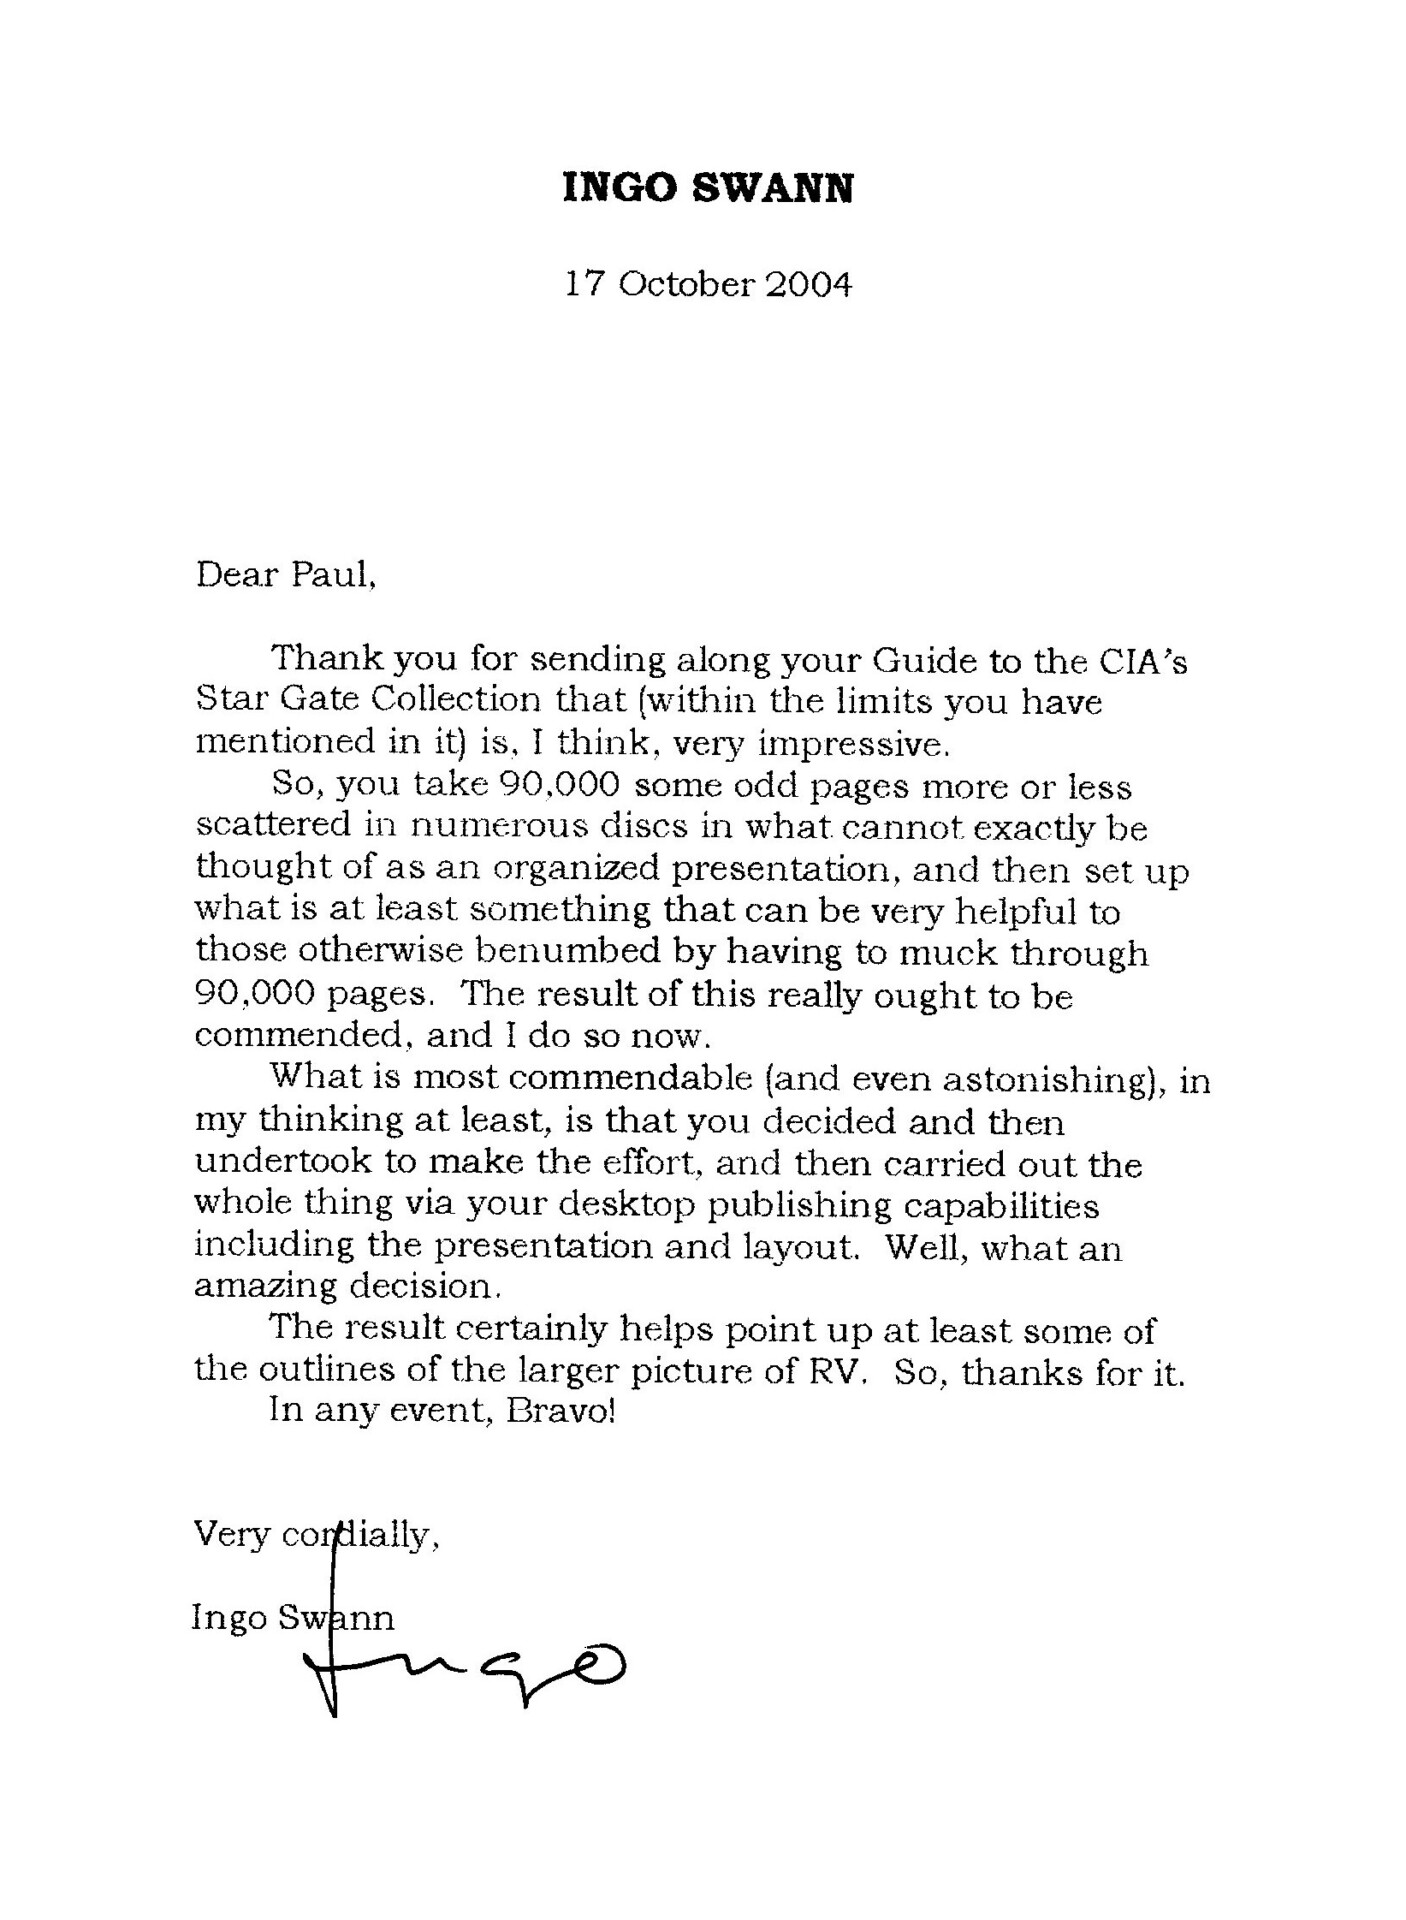 Letter from Ingo Swann to Paul H. Smith, Oct 17, 2004